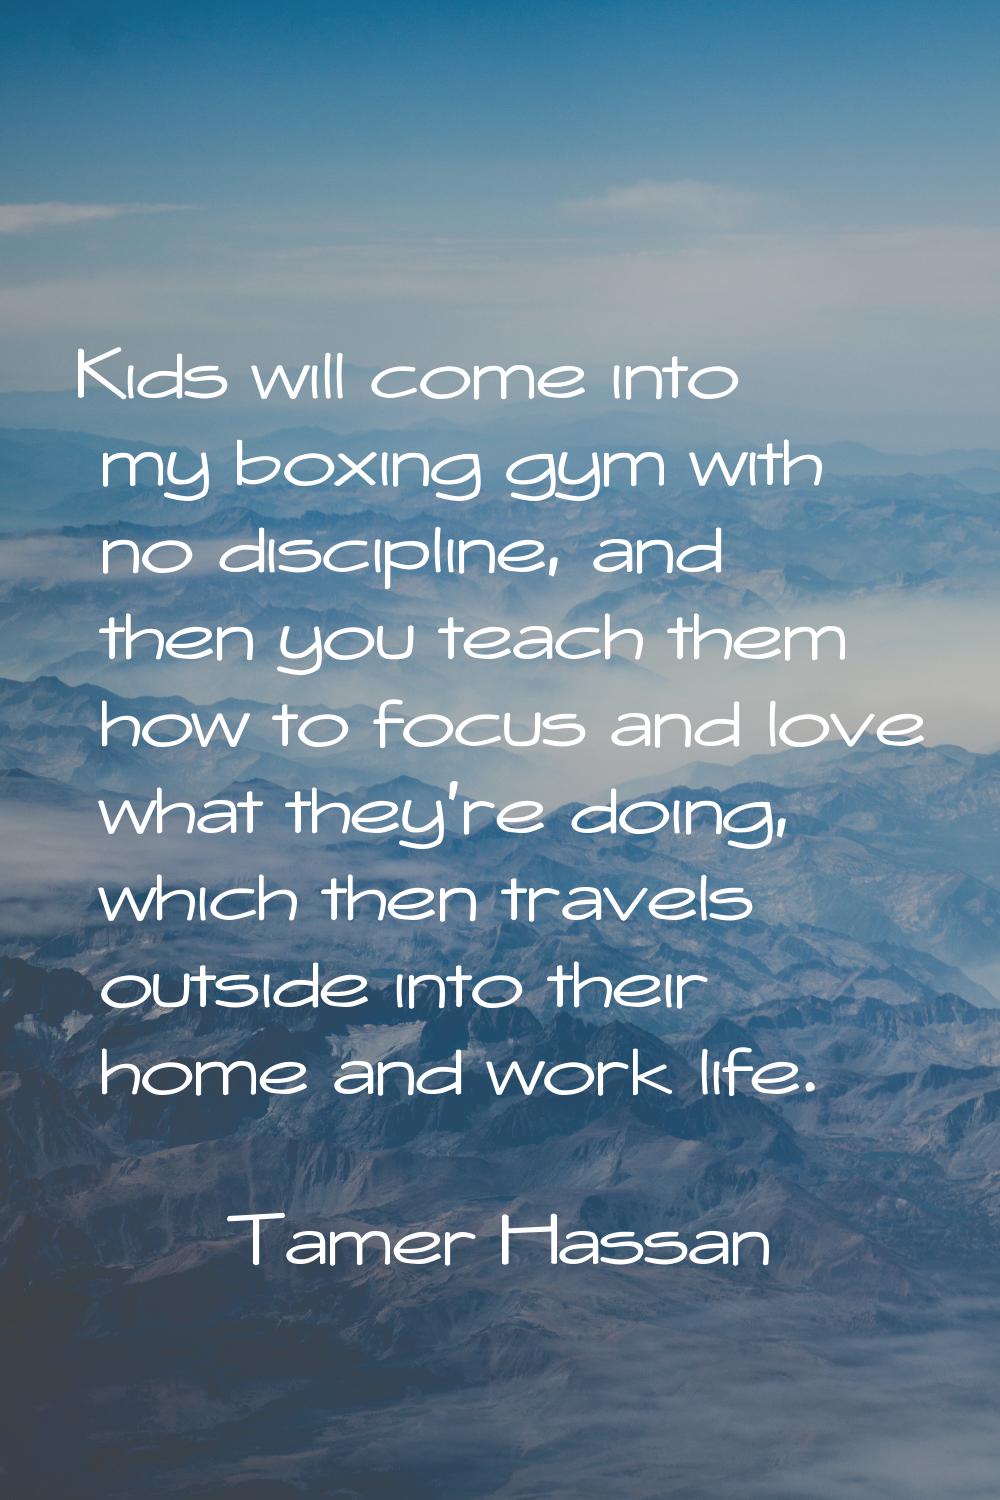 Kids will come into my boxing gym with no discipline, and then you teach them how to focus and love